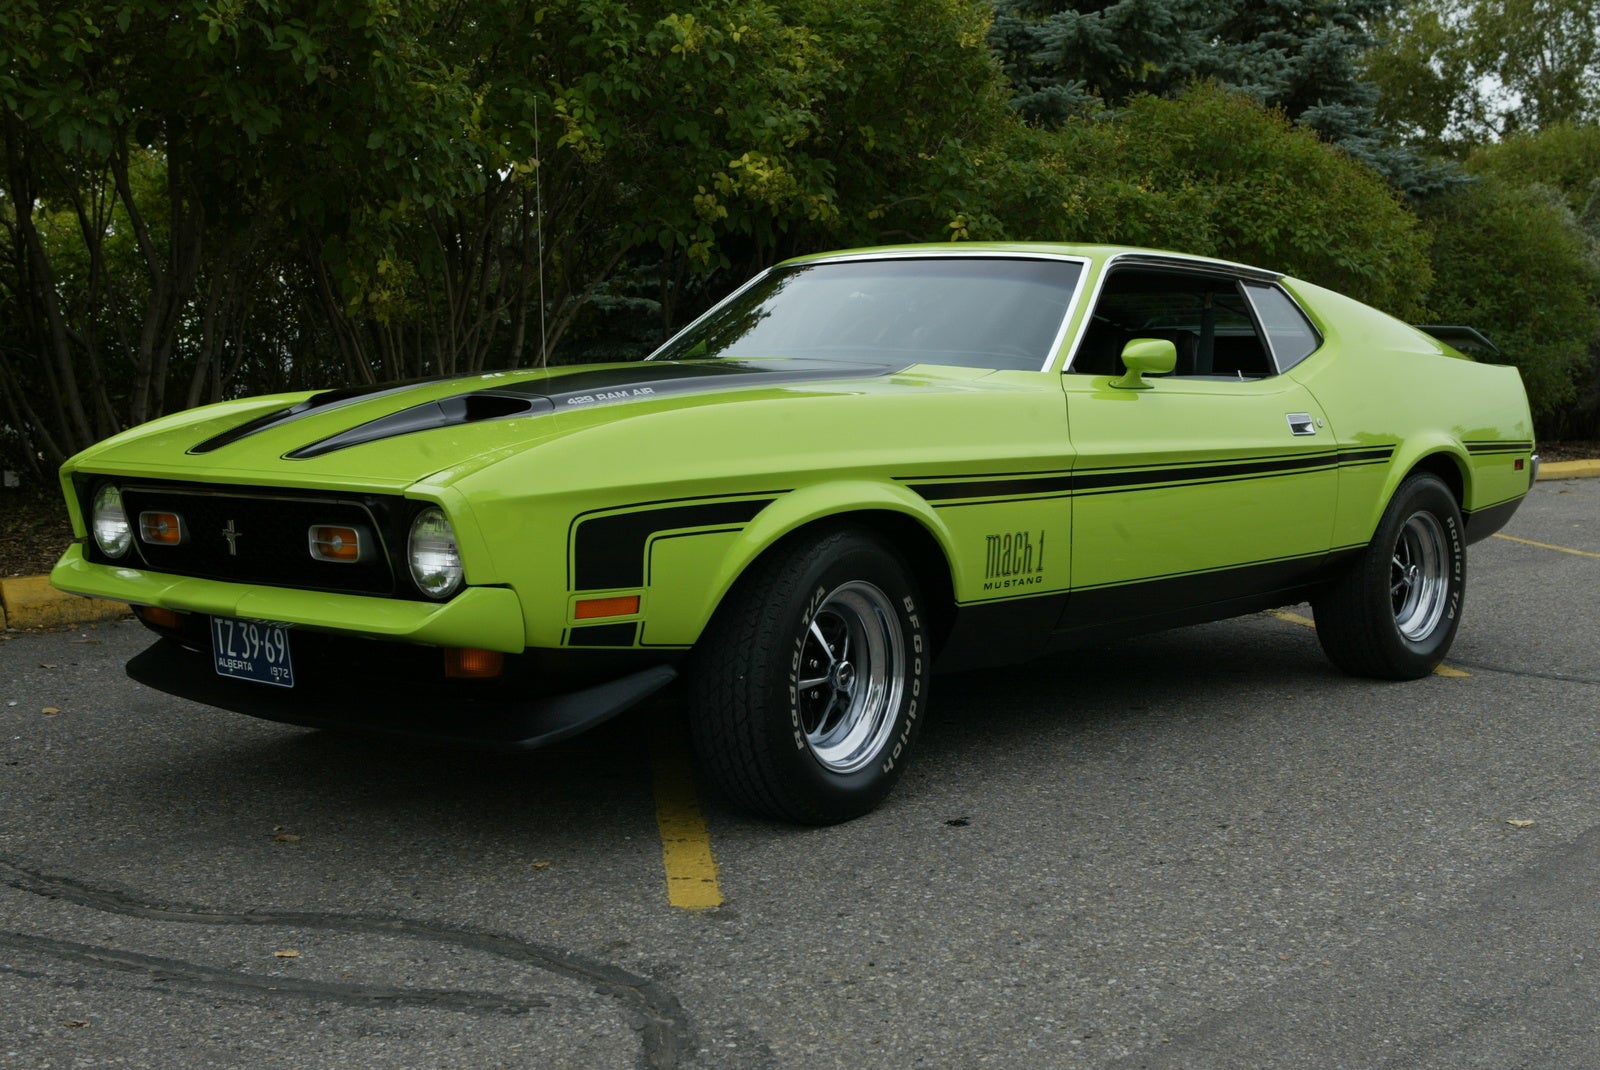 We Love Ford's, Past, Present And Future.: 1972 Ford Mustangs